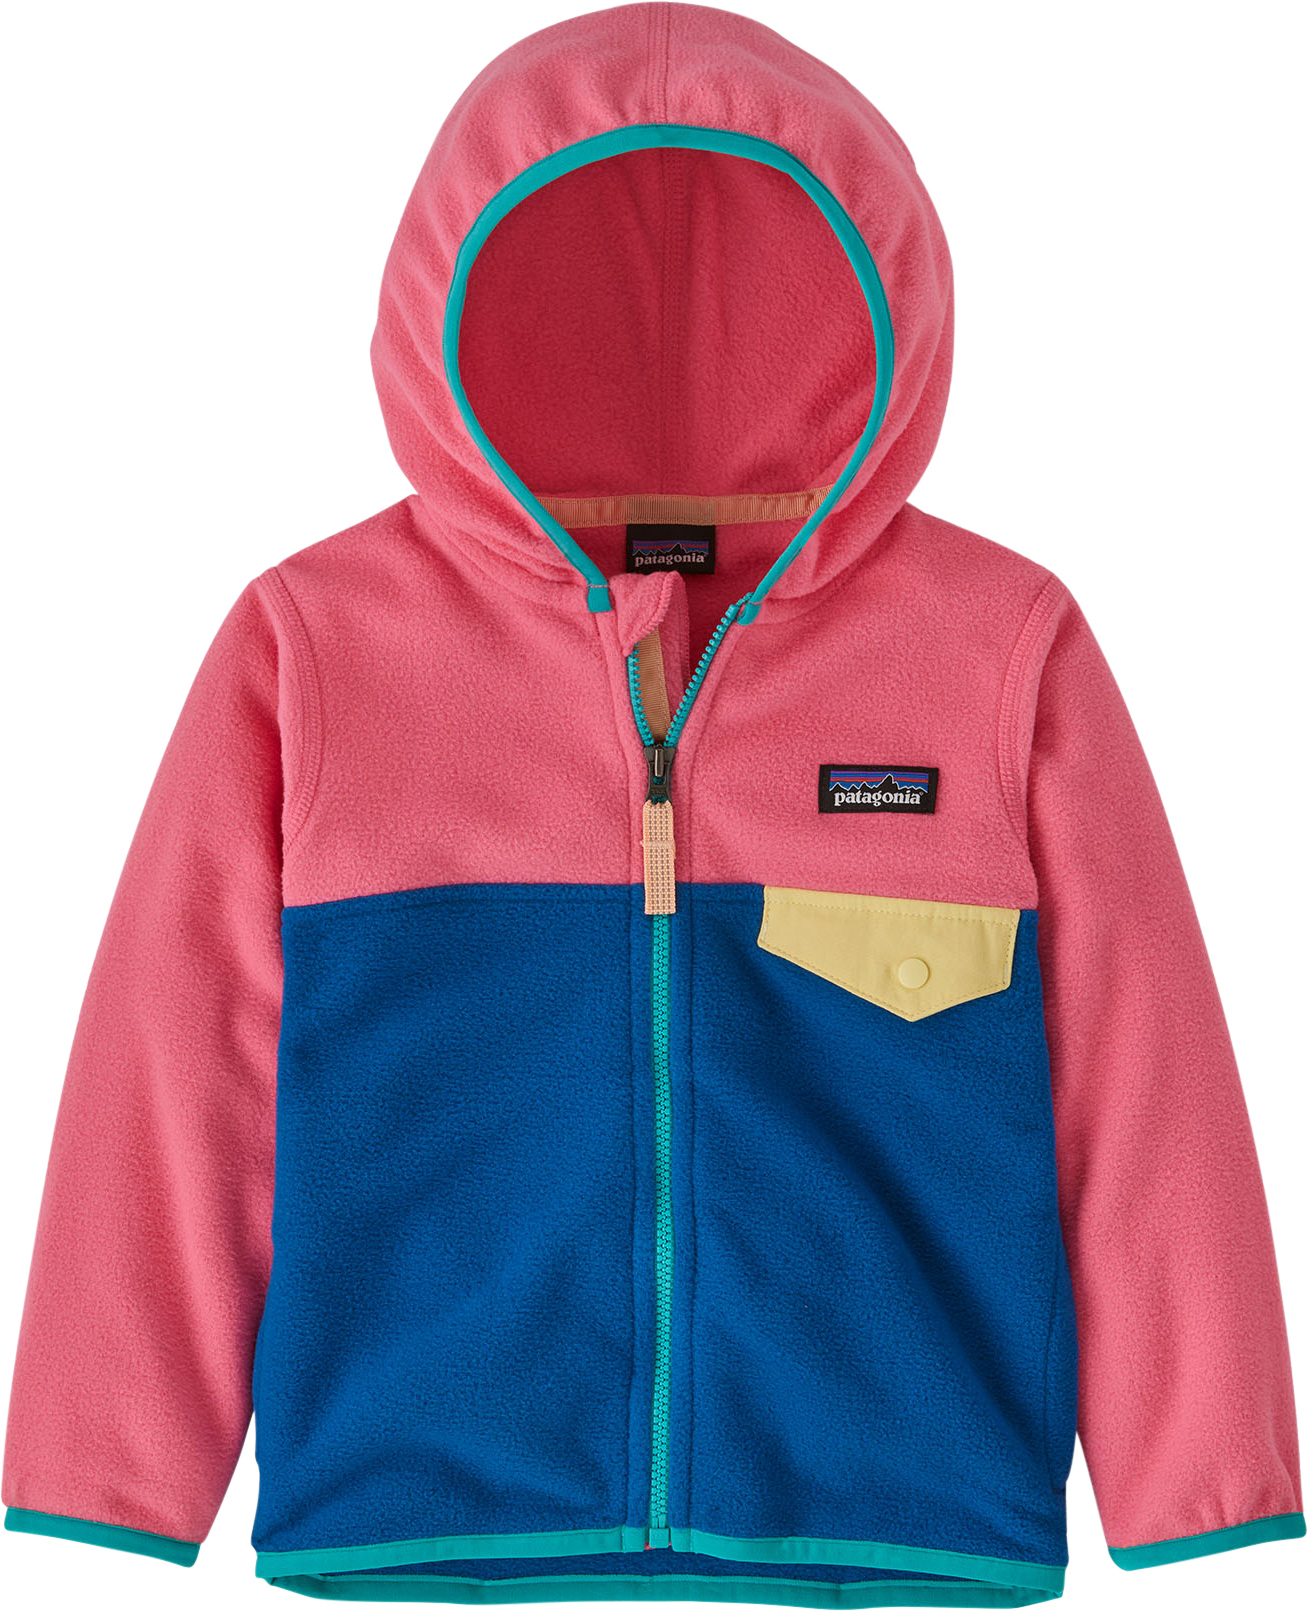 Patagonia Micro D Snap-T Jacket - Infants to Children | MEC